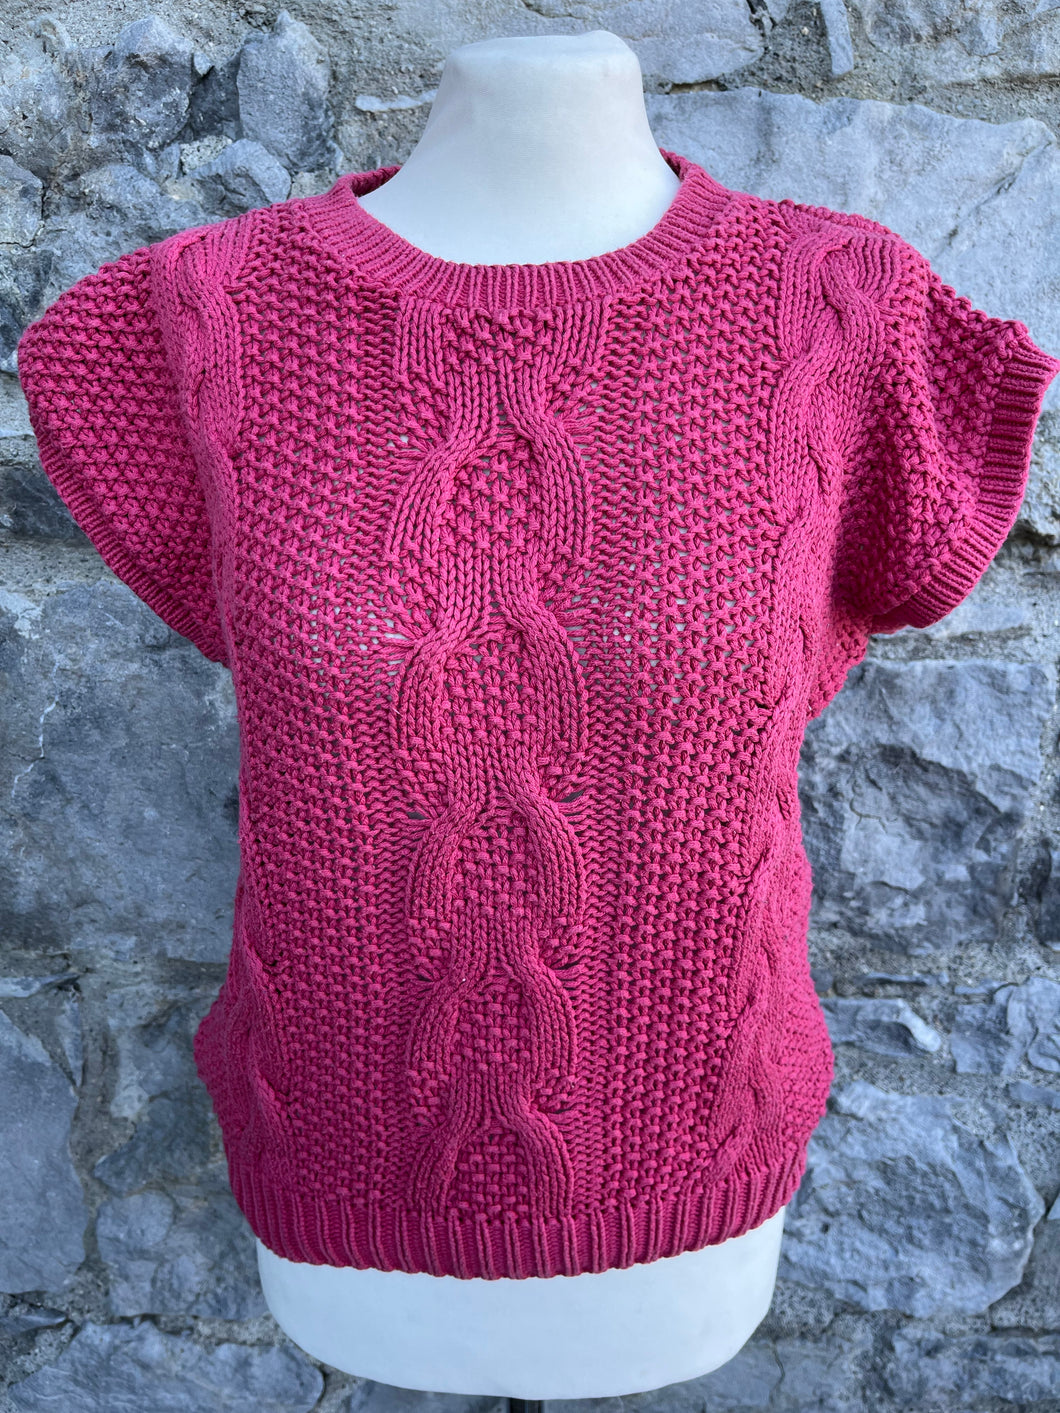 90s knitted top uk 8-10